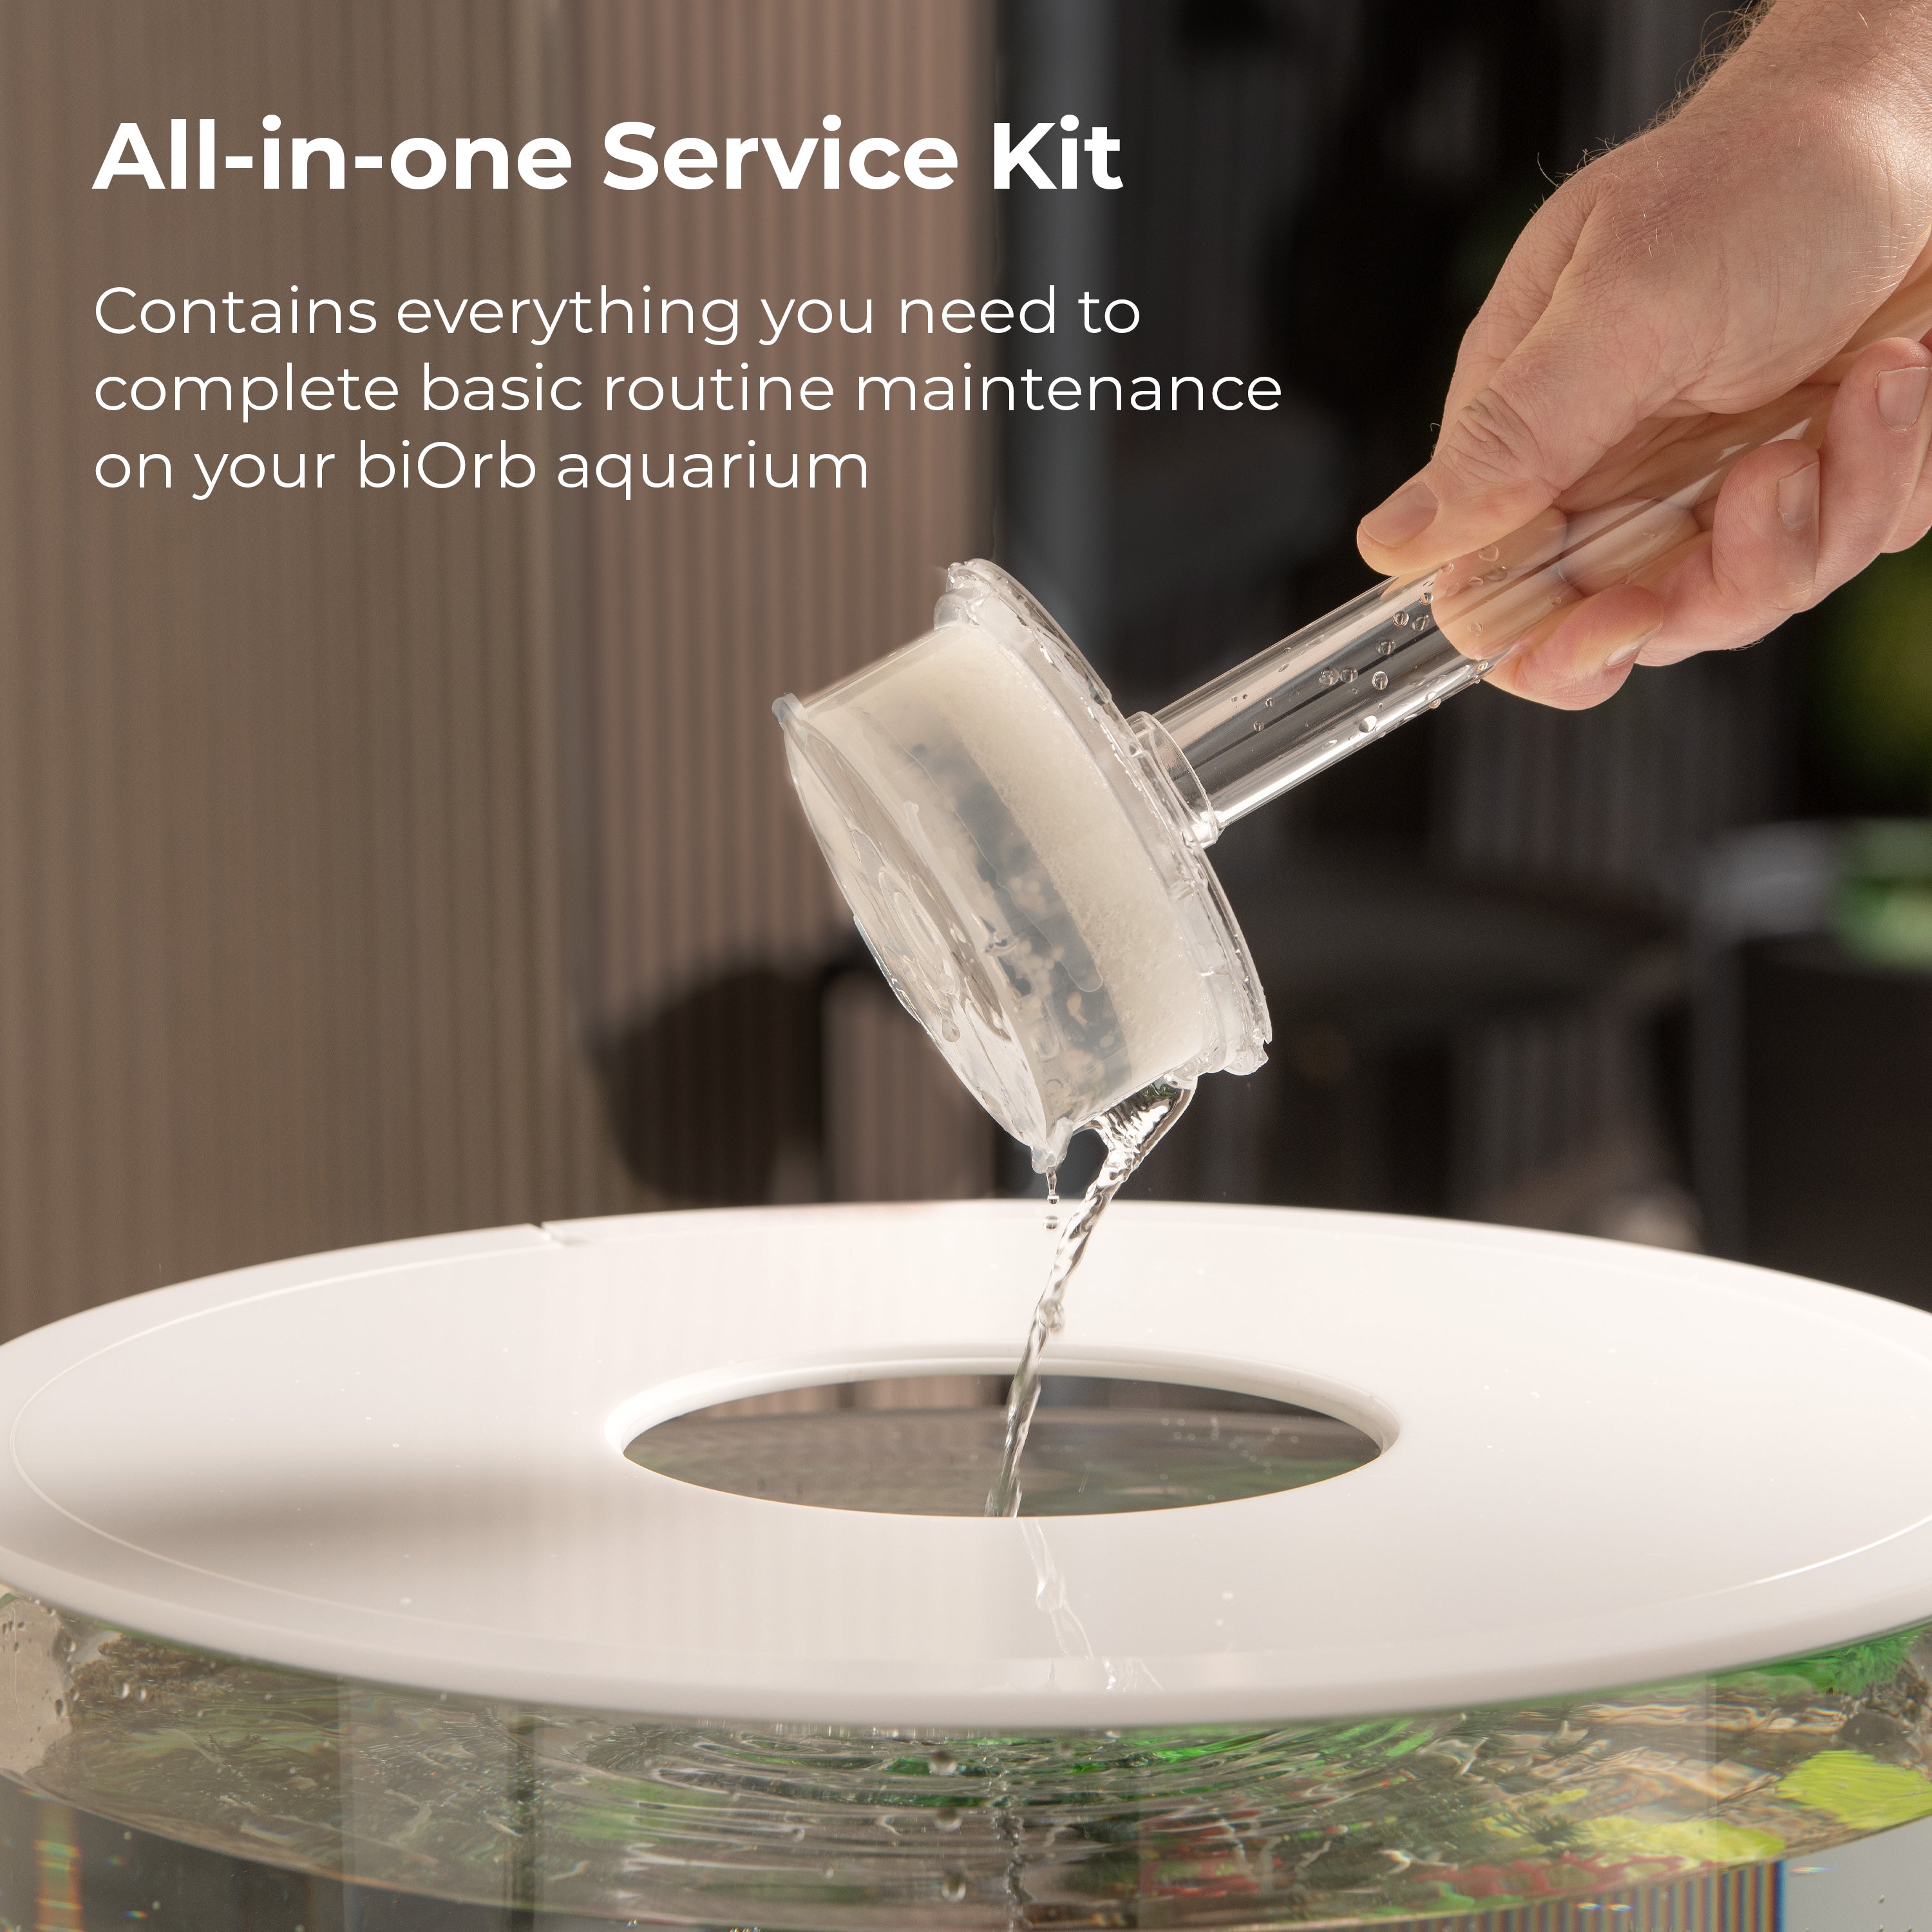 Service Kit x3 plus Water Optimiser - All-in-one service kit